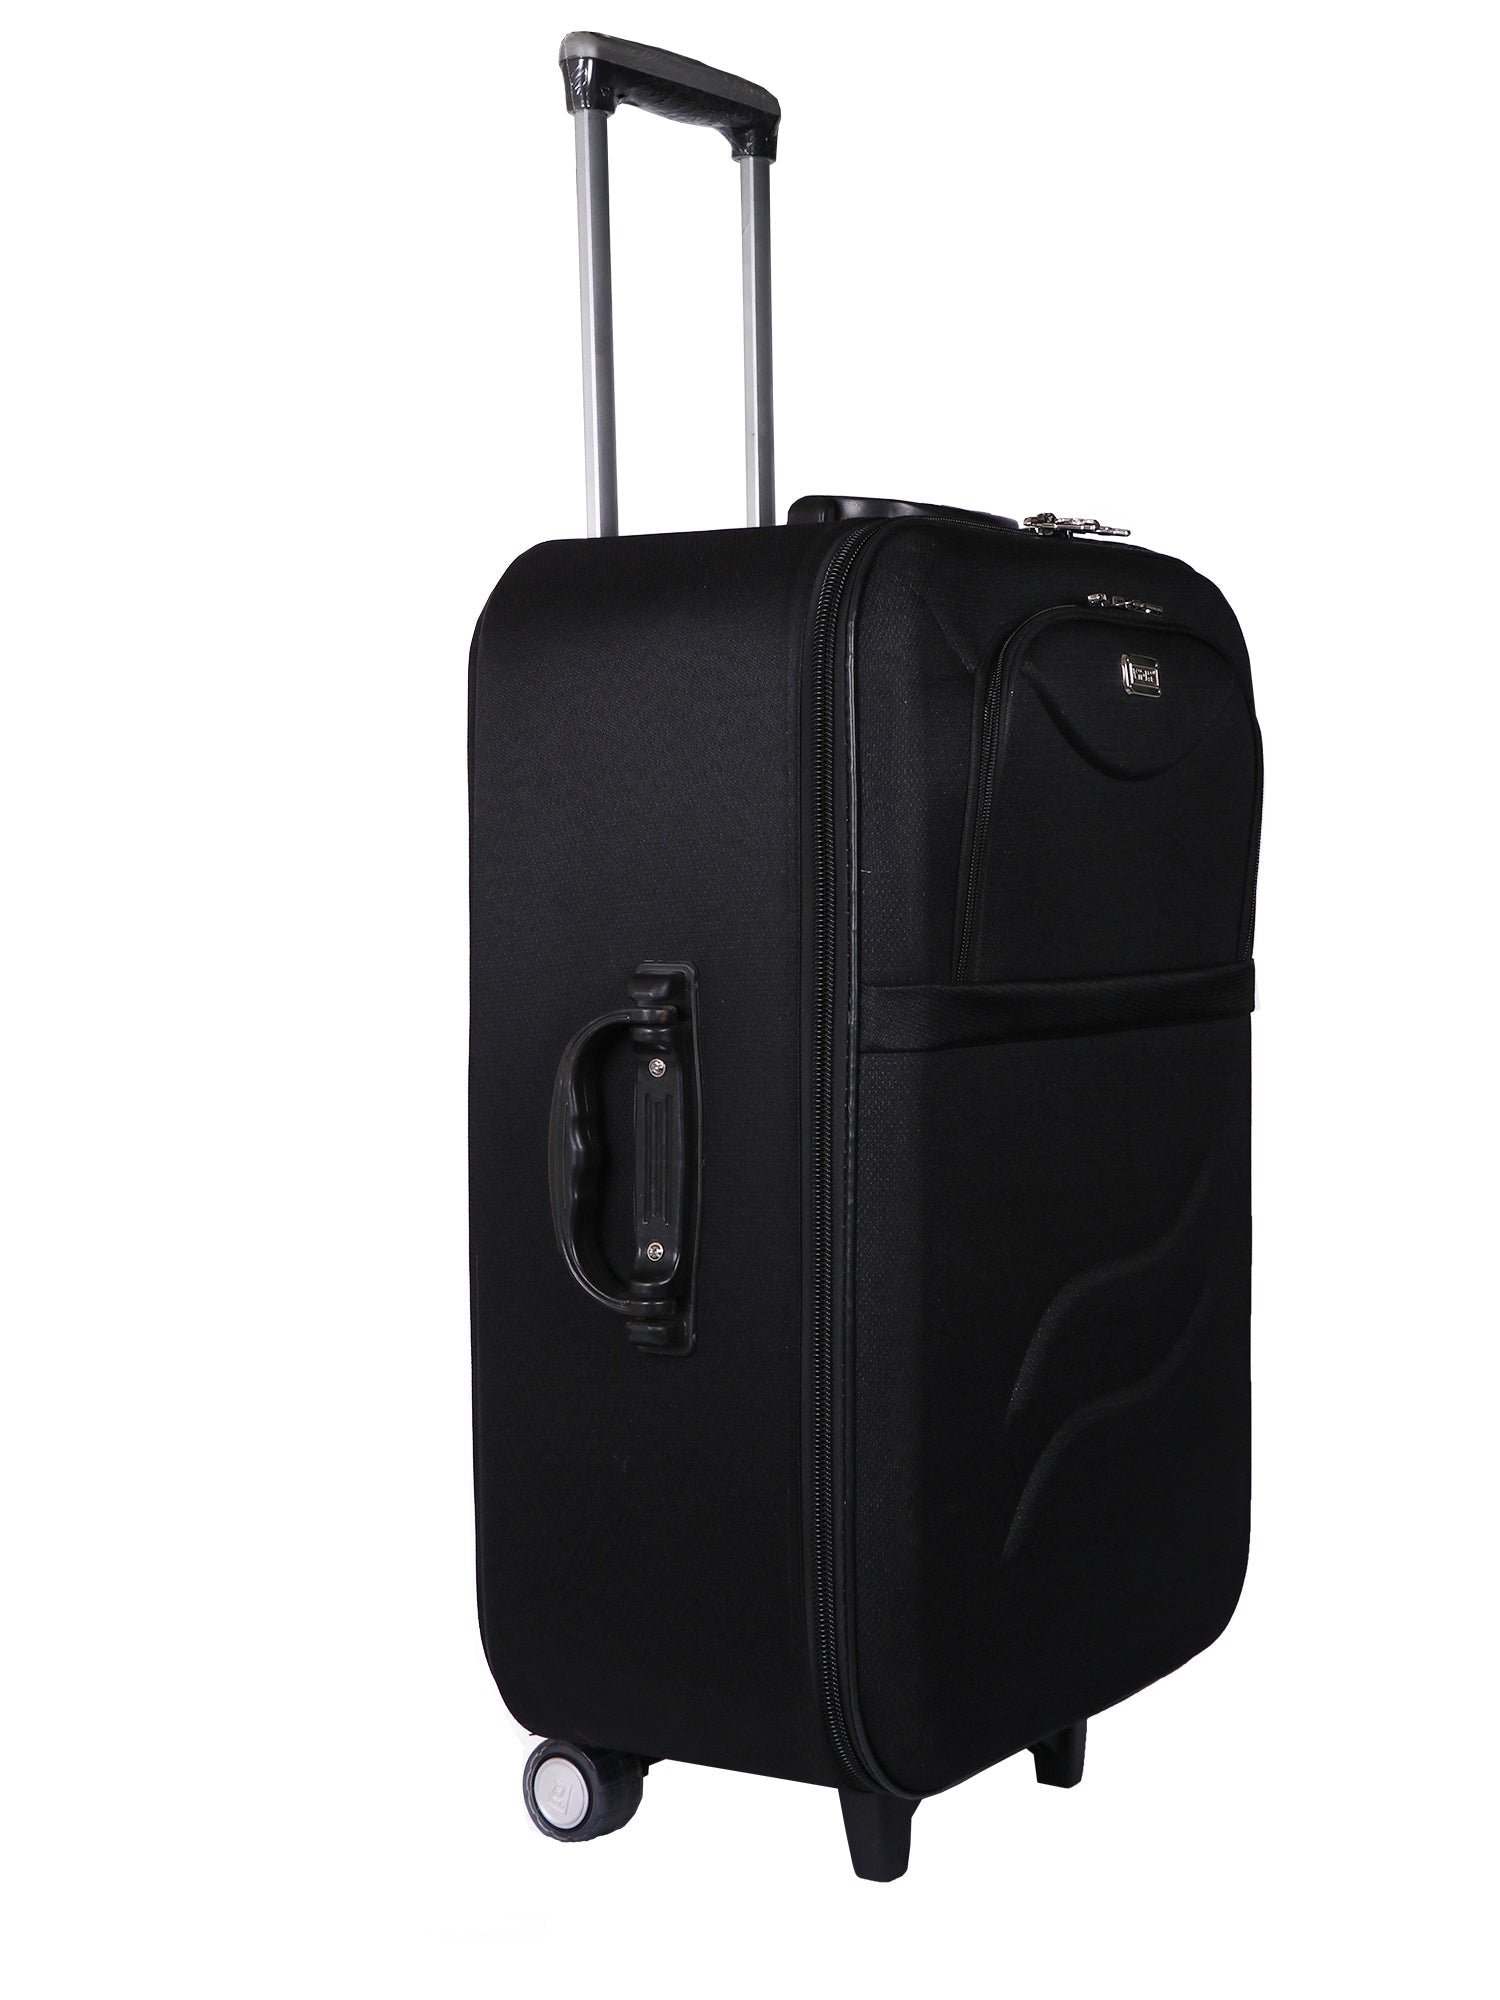 Buy Luggage & Travel Online - Shop on Carrefour Pakistan